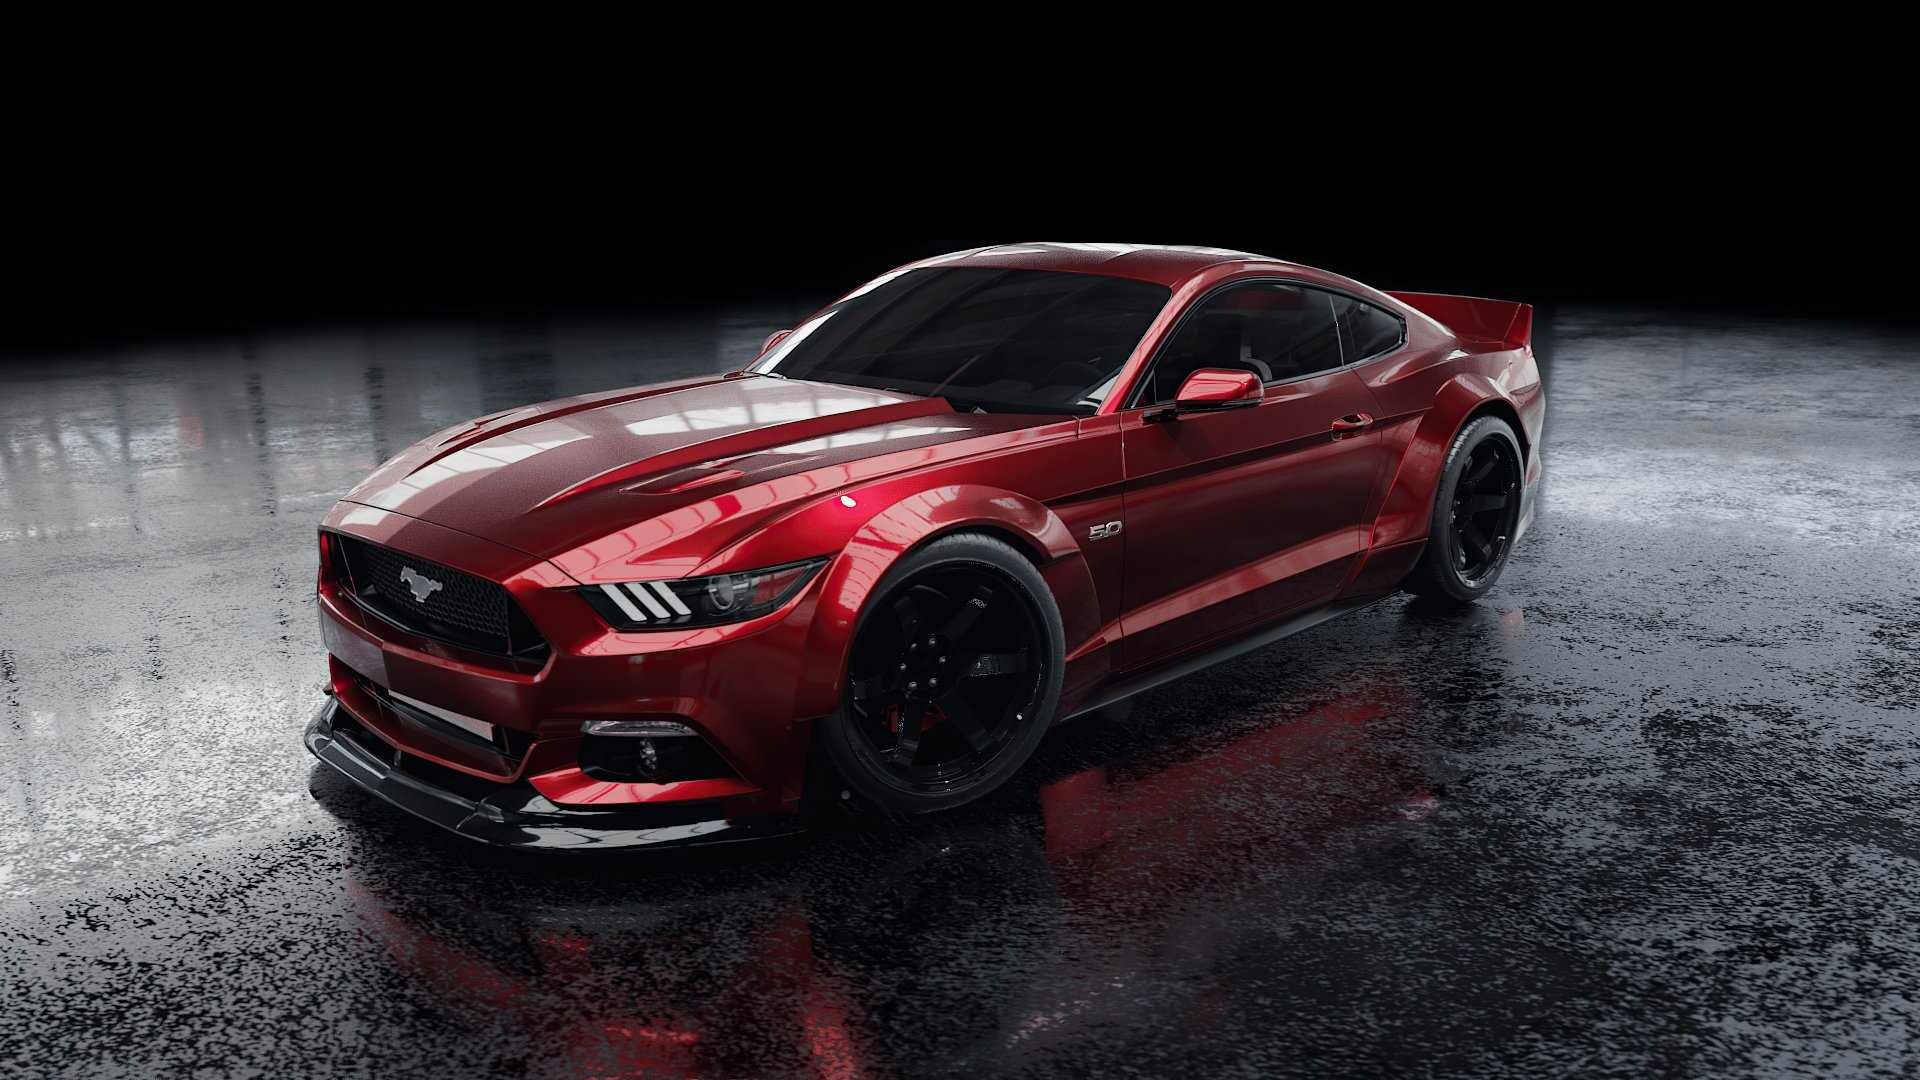 Ford: Mustang, A 2+2 sports car launched in the 1960s. 1920x1080 Full HD Background.